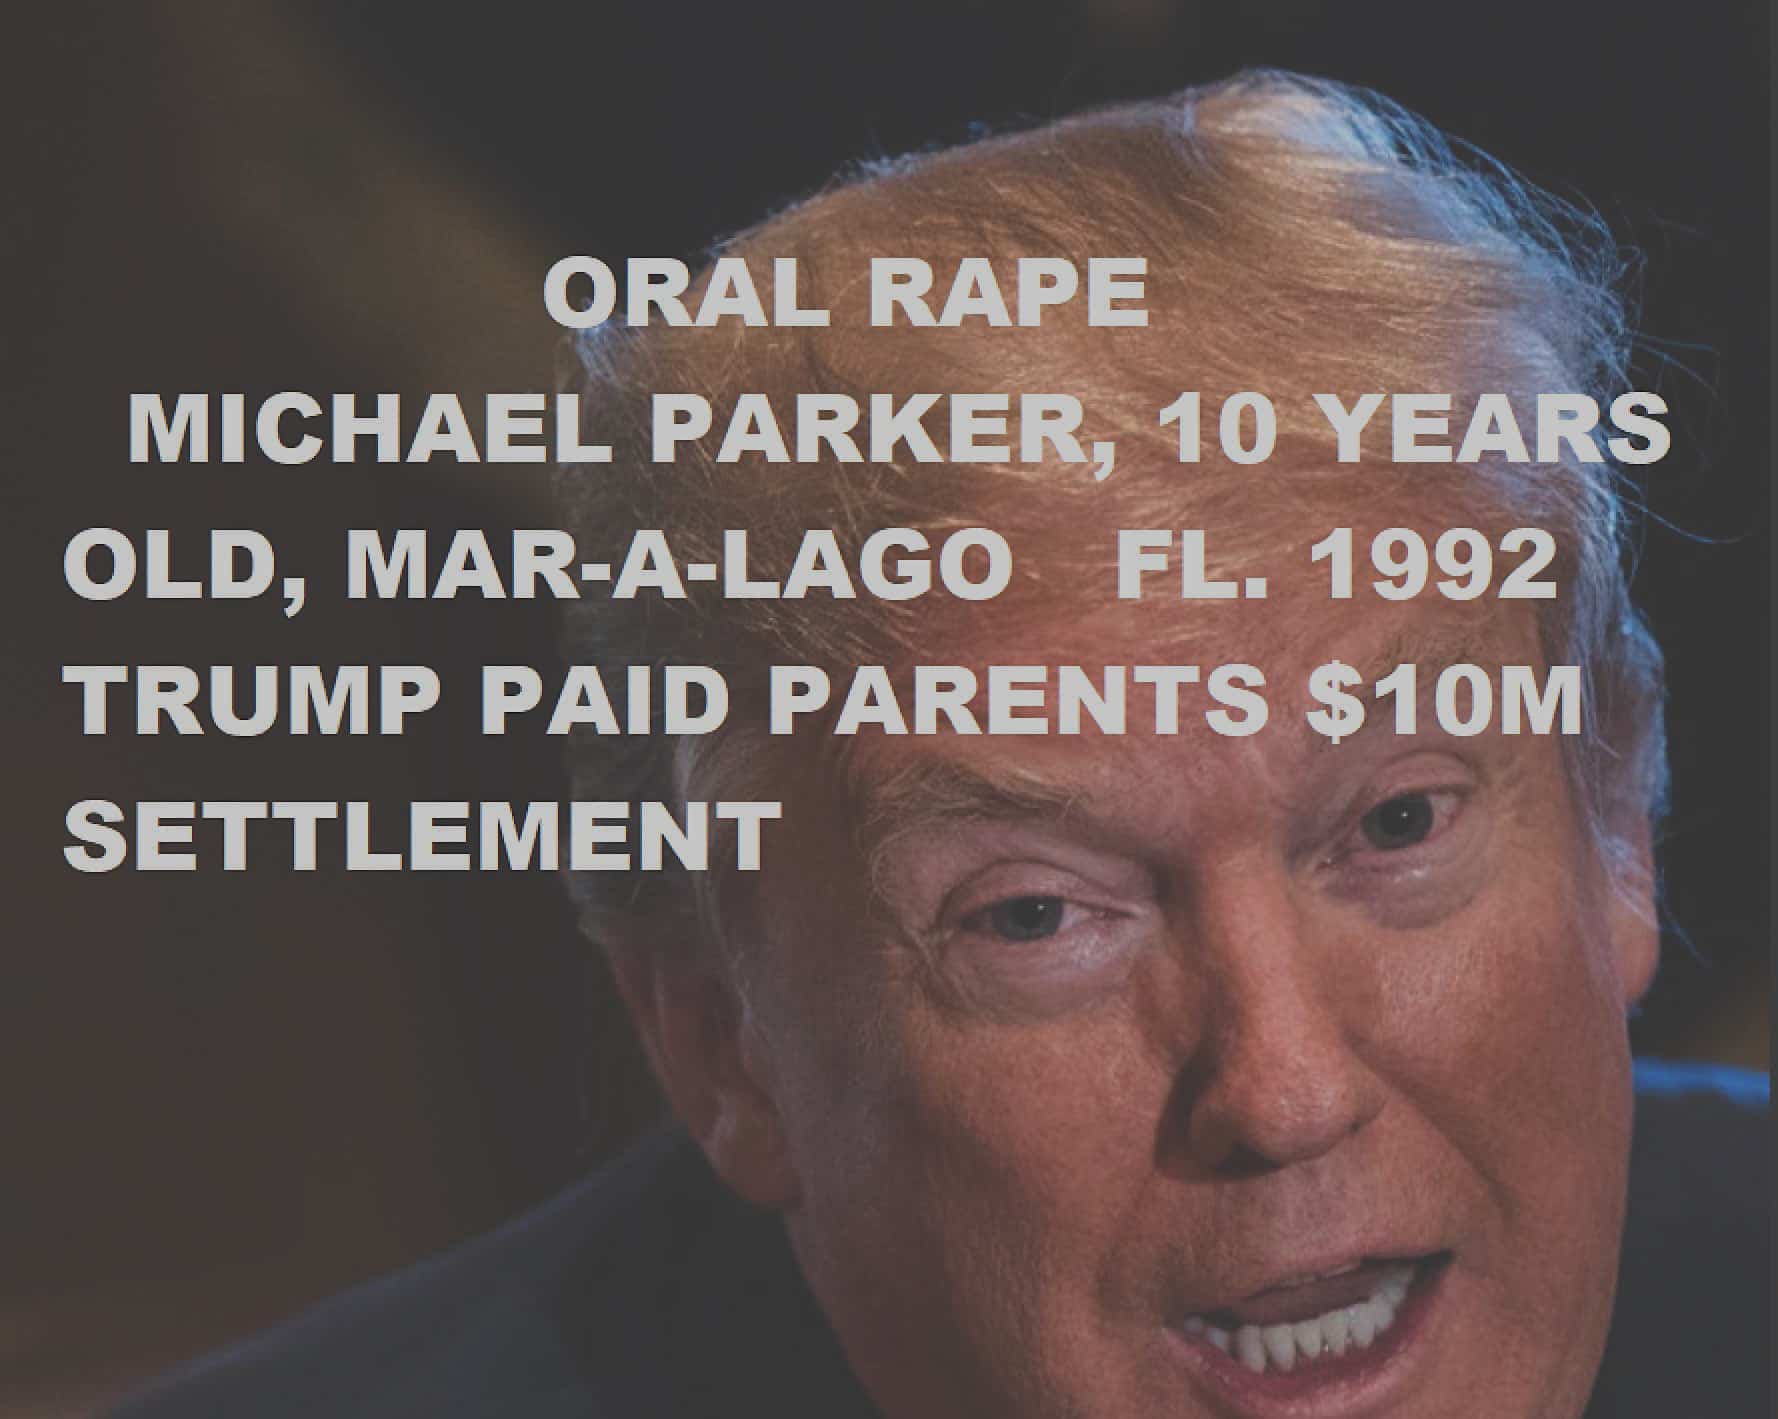 Blockbuster Report: Trump Settlements for 10 Child Rapes, Claiming a Mental Disorder “Pedophilic Disorder F65.4”